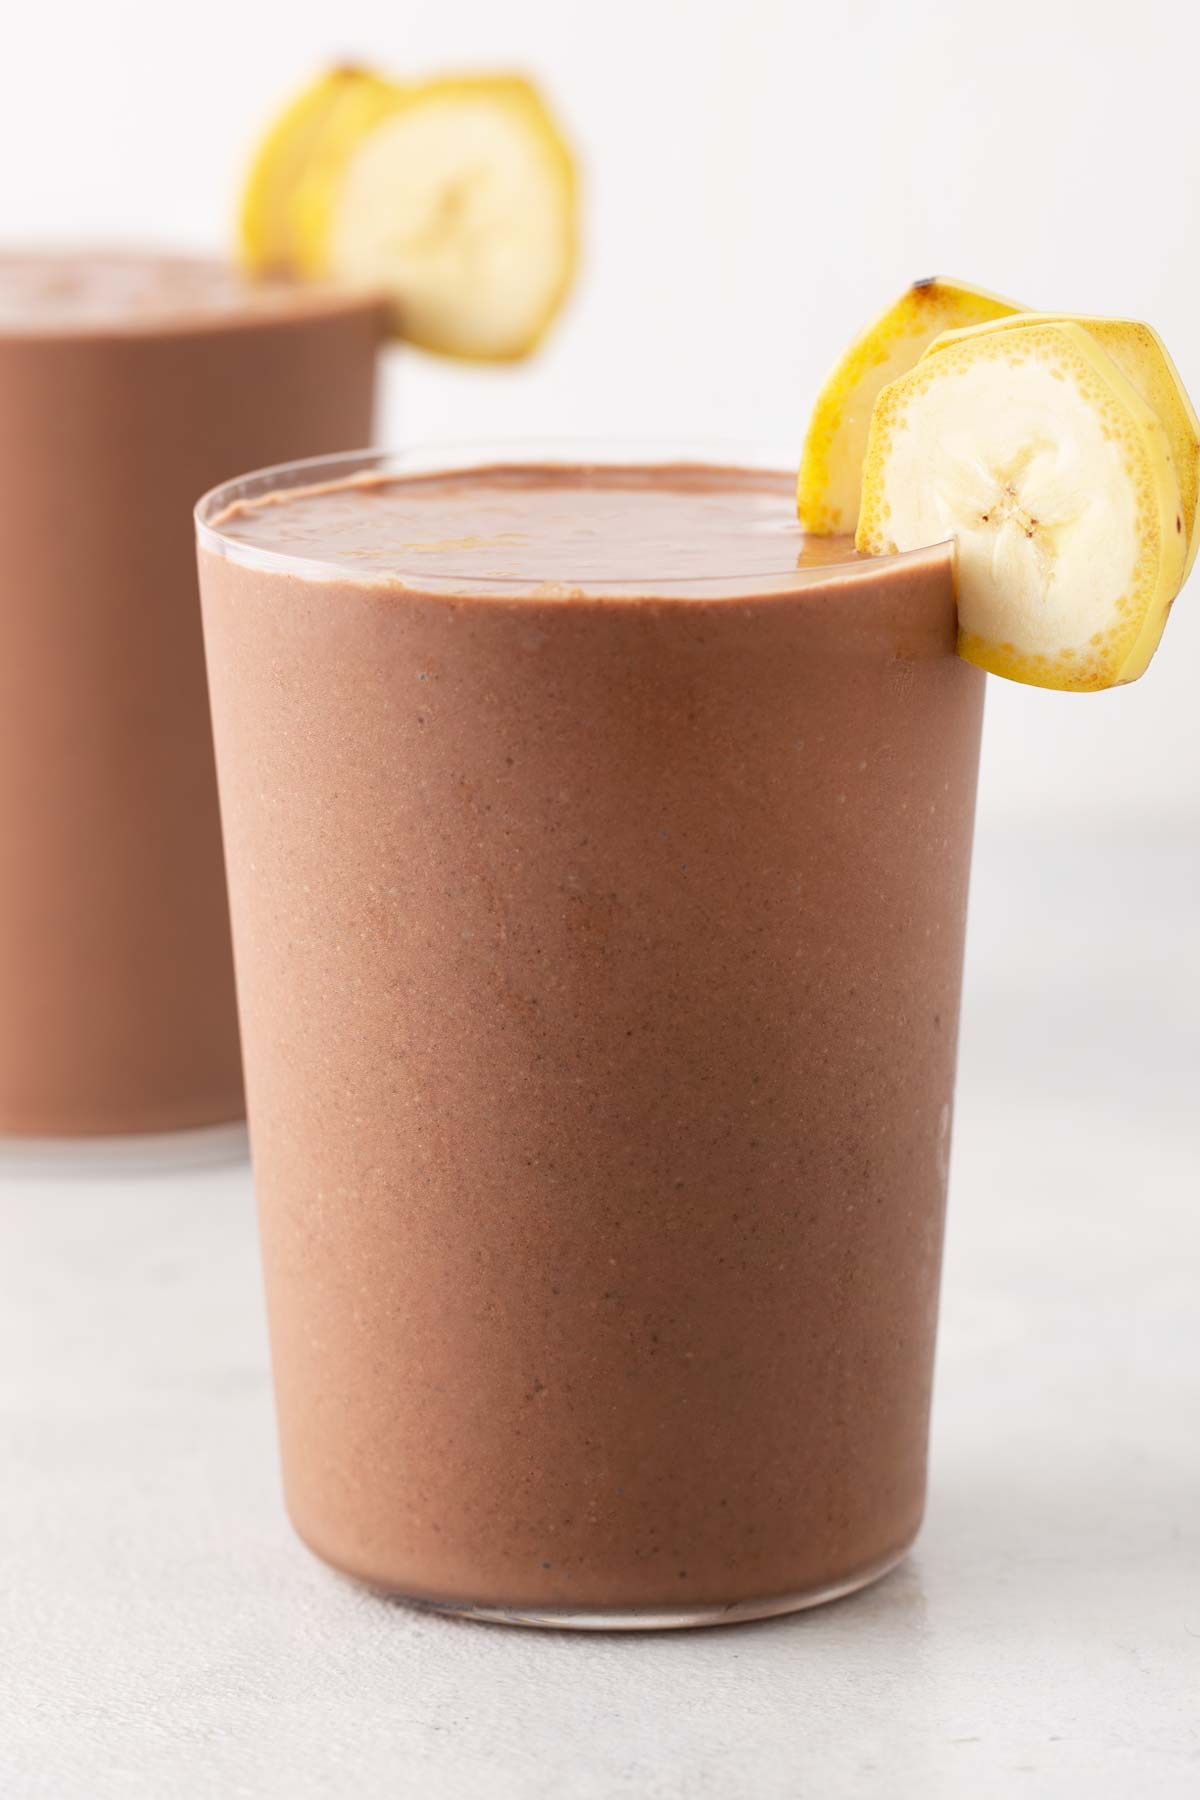 Chocolate peanut butter banana smoothie in a glass.